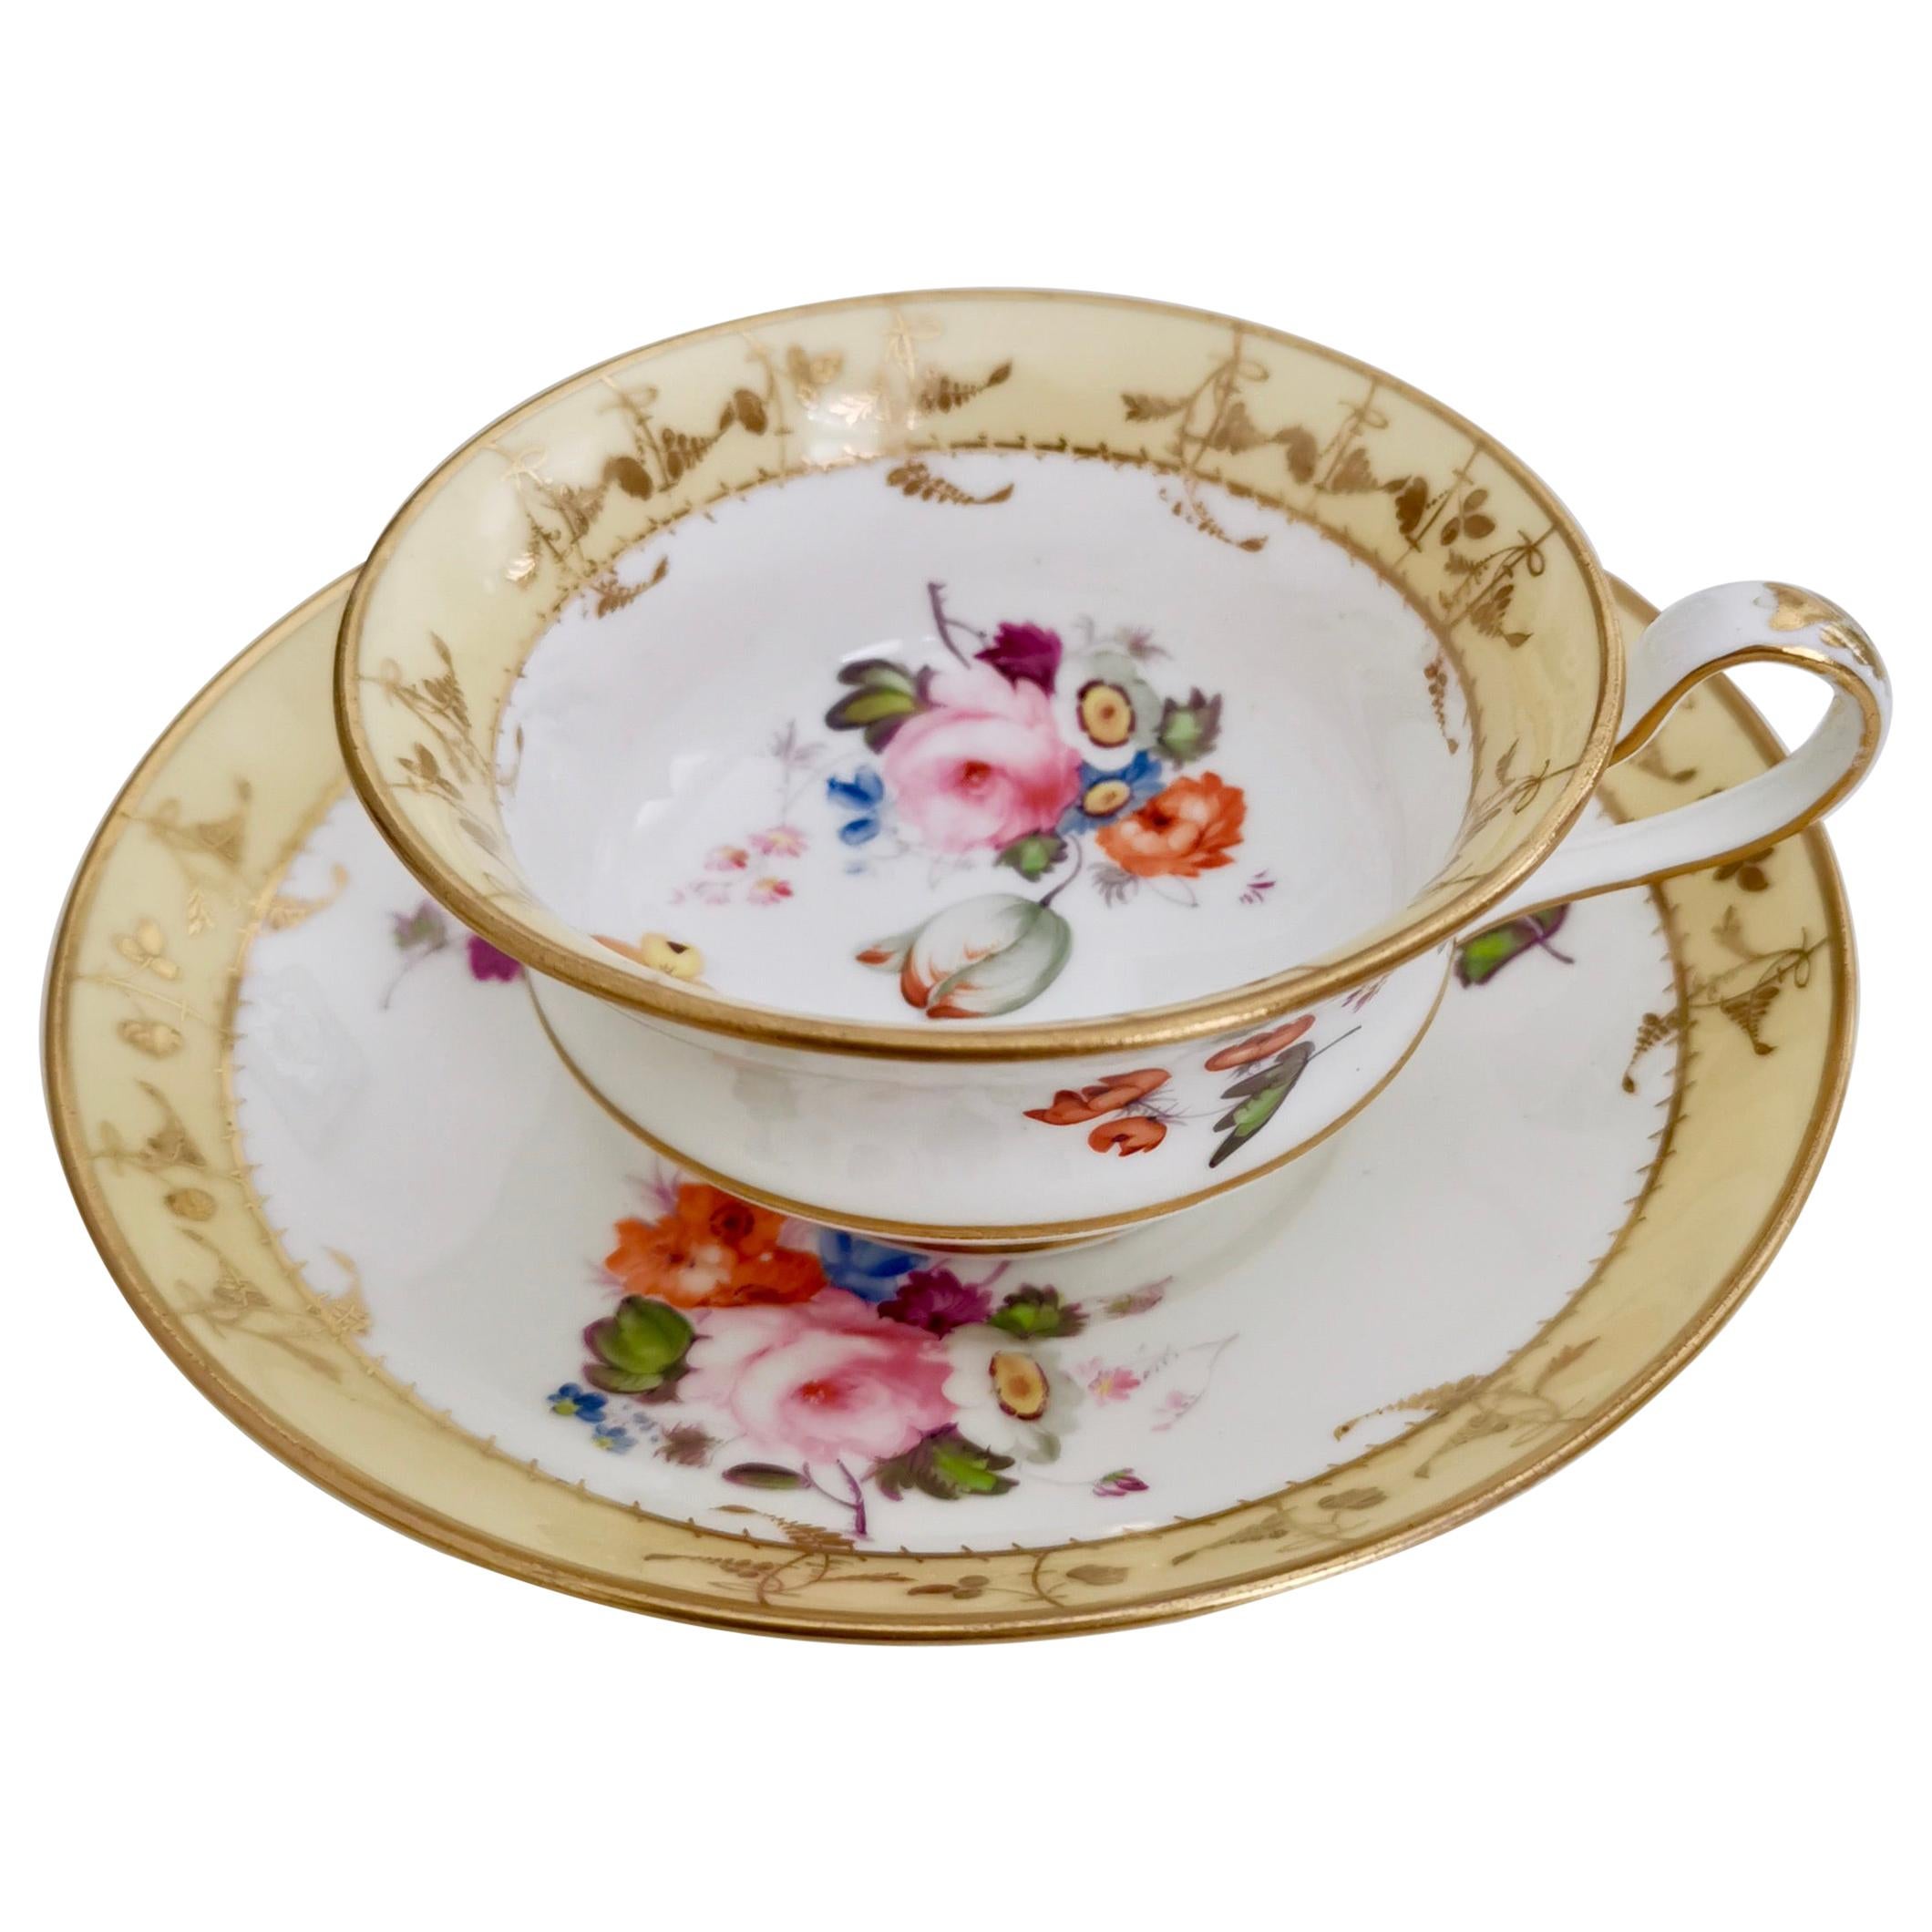 Minton Porcelain Teacup, Yellow with Hand Painted Flowers, Regency, circa 1825